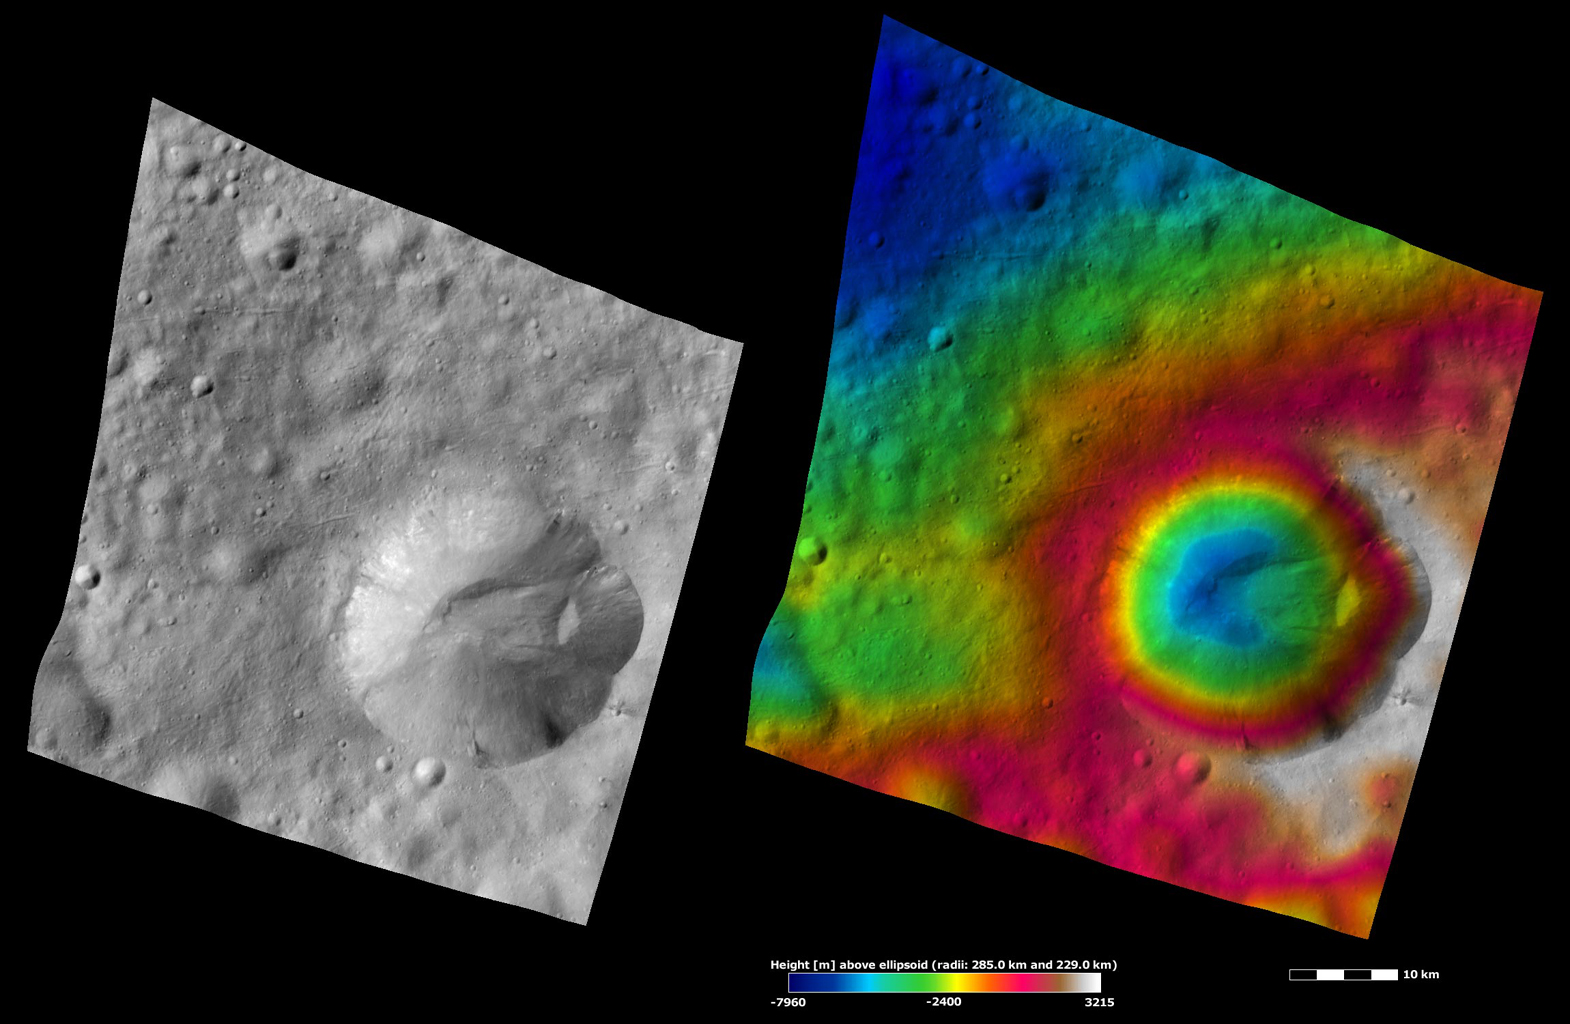 Apparent Brightness and Topography Images of Octavia Crater